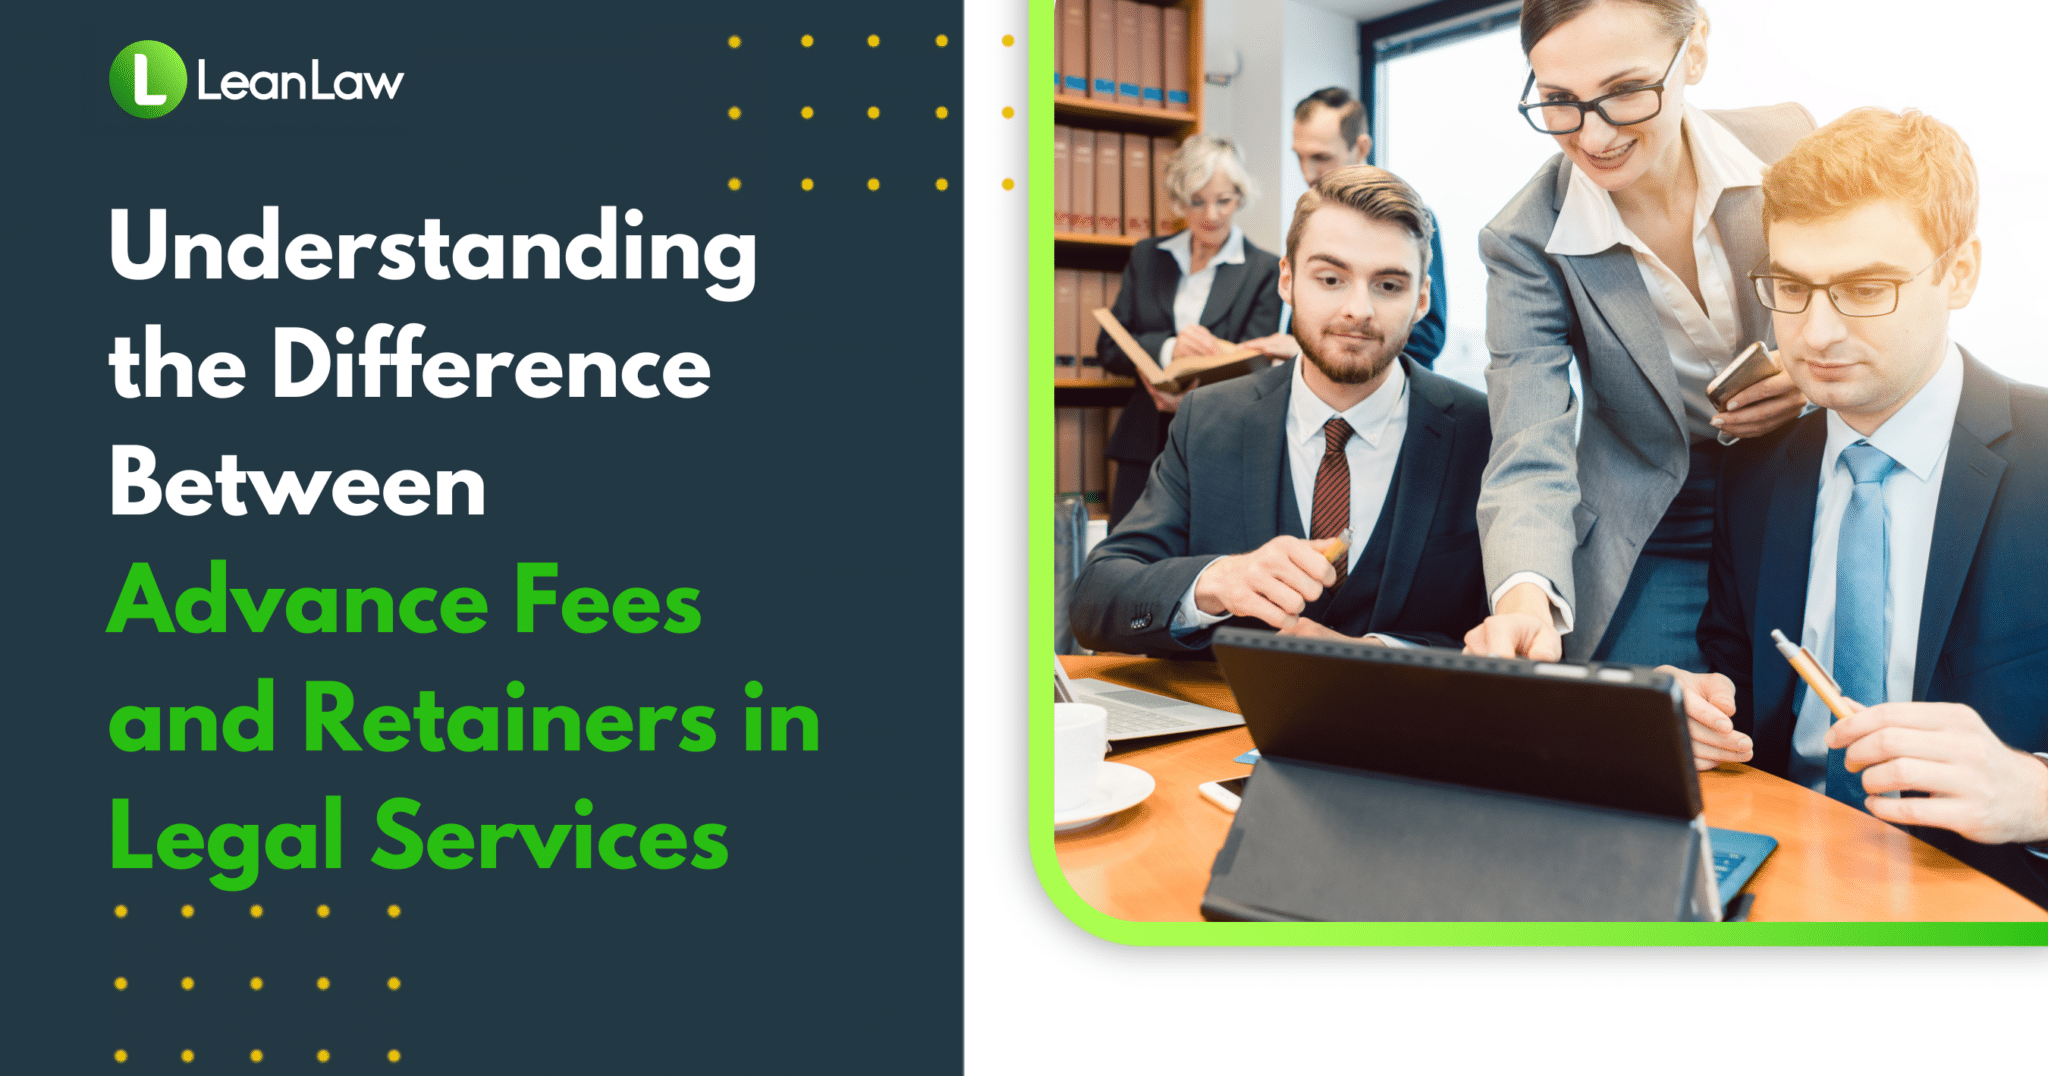 Understanding the Difference Between Advance Fees and Retainers in Legal Services